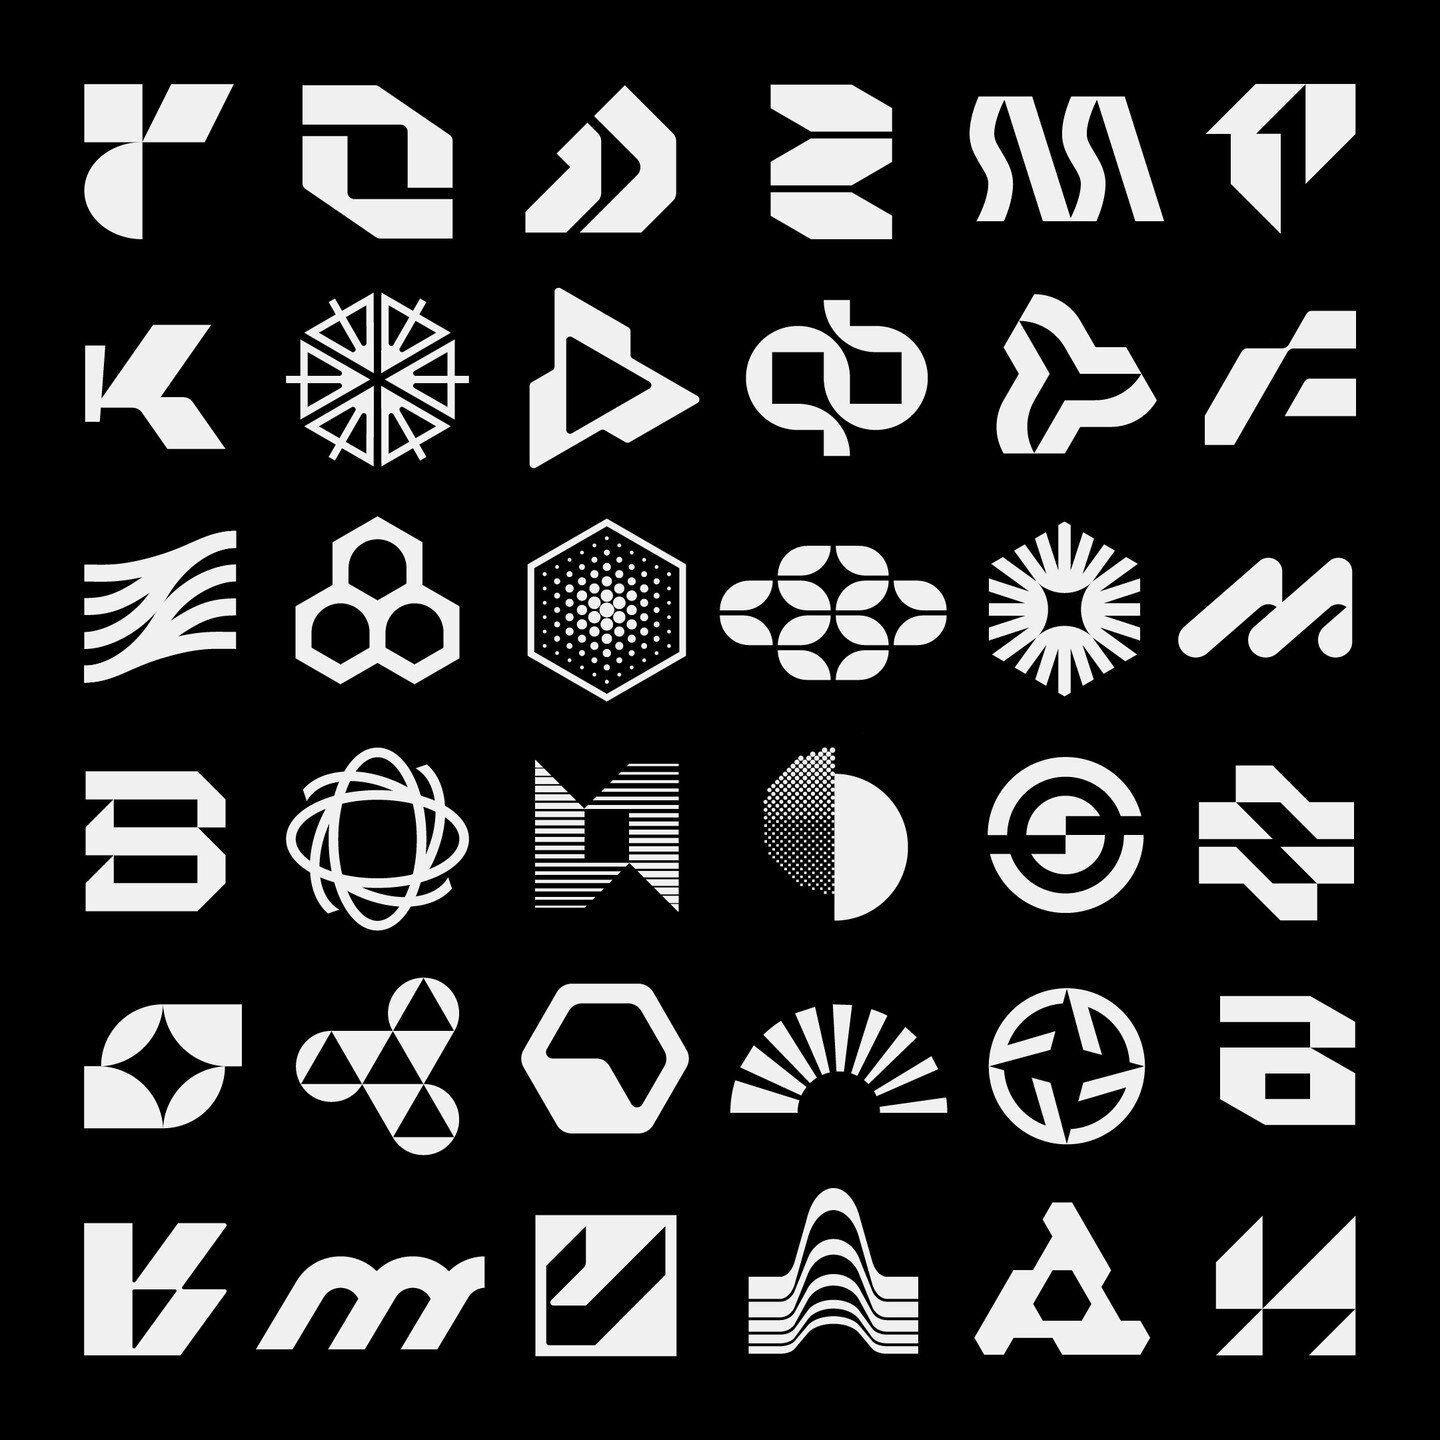 Logomark Collection

Put together this collection while uploading my @logolounge book 14 submissions. 

#logoloungebook14 #logolounge #logodesigner #logocompetition #book14 #graphicdesign #logos #logoinspirations #logomark #logo #logodesign #graphicd